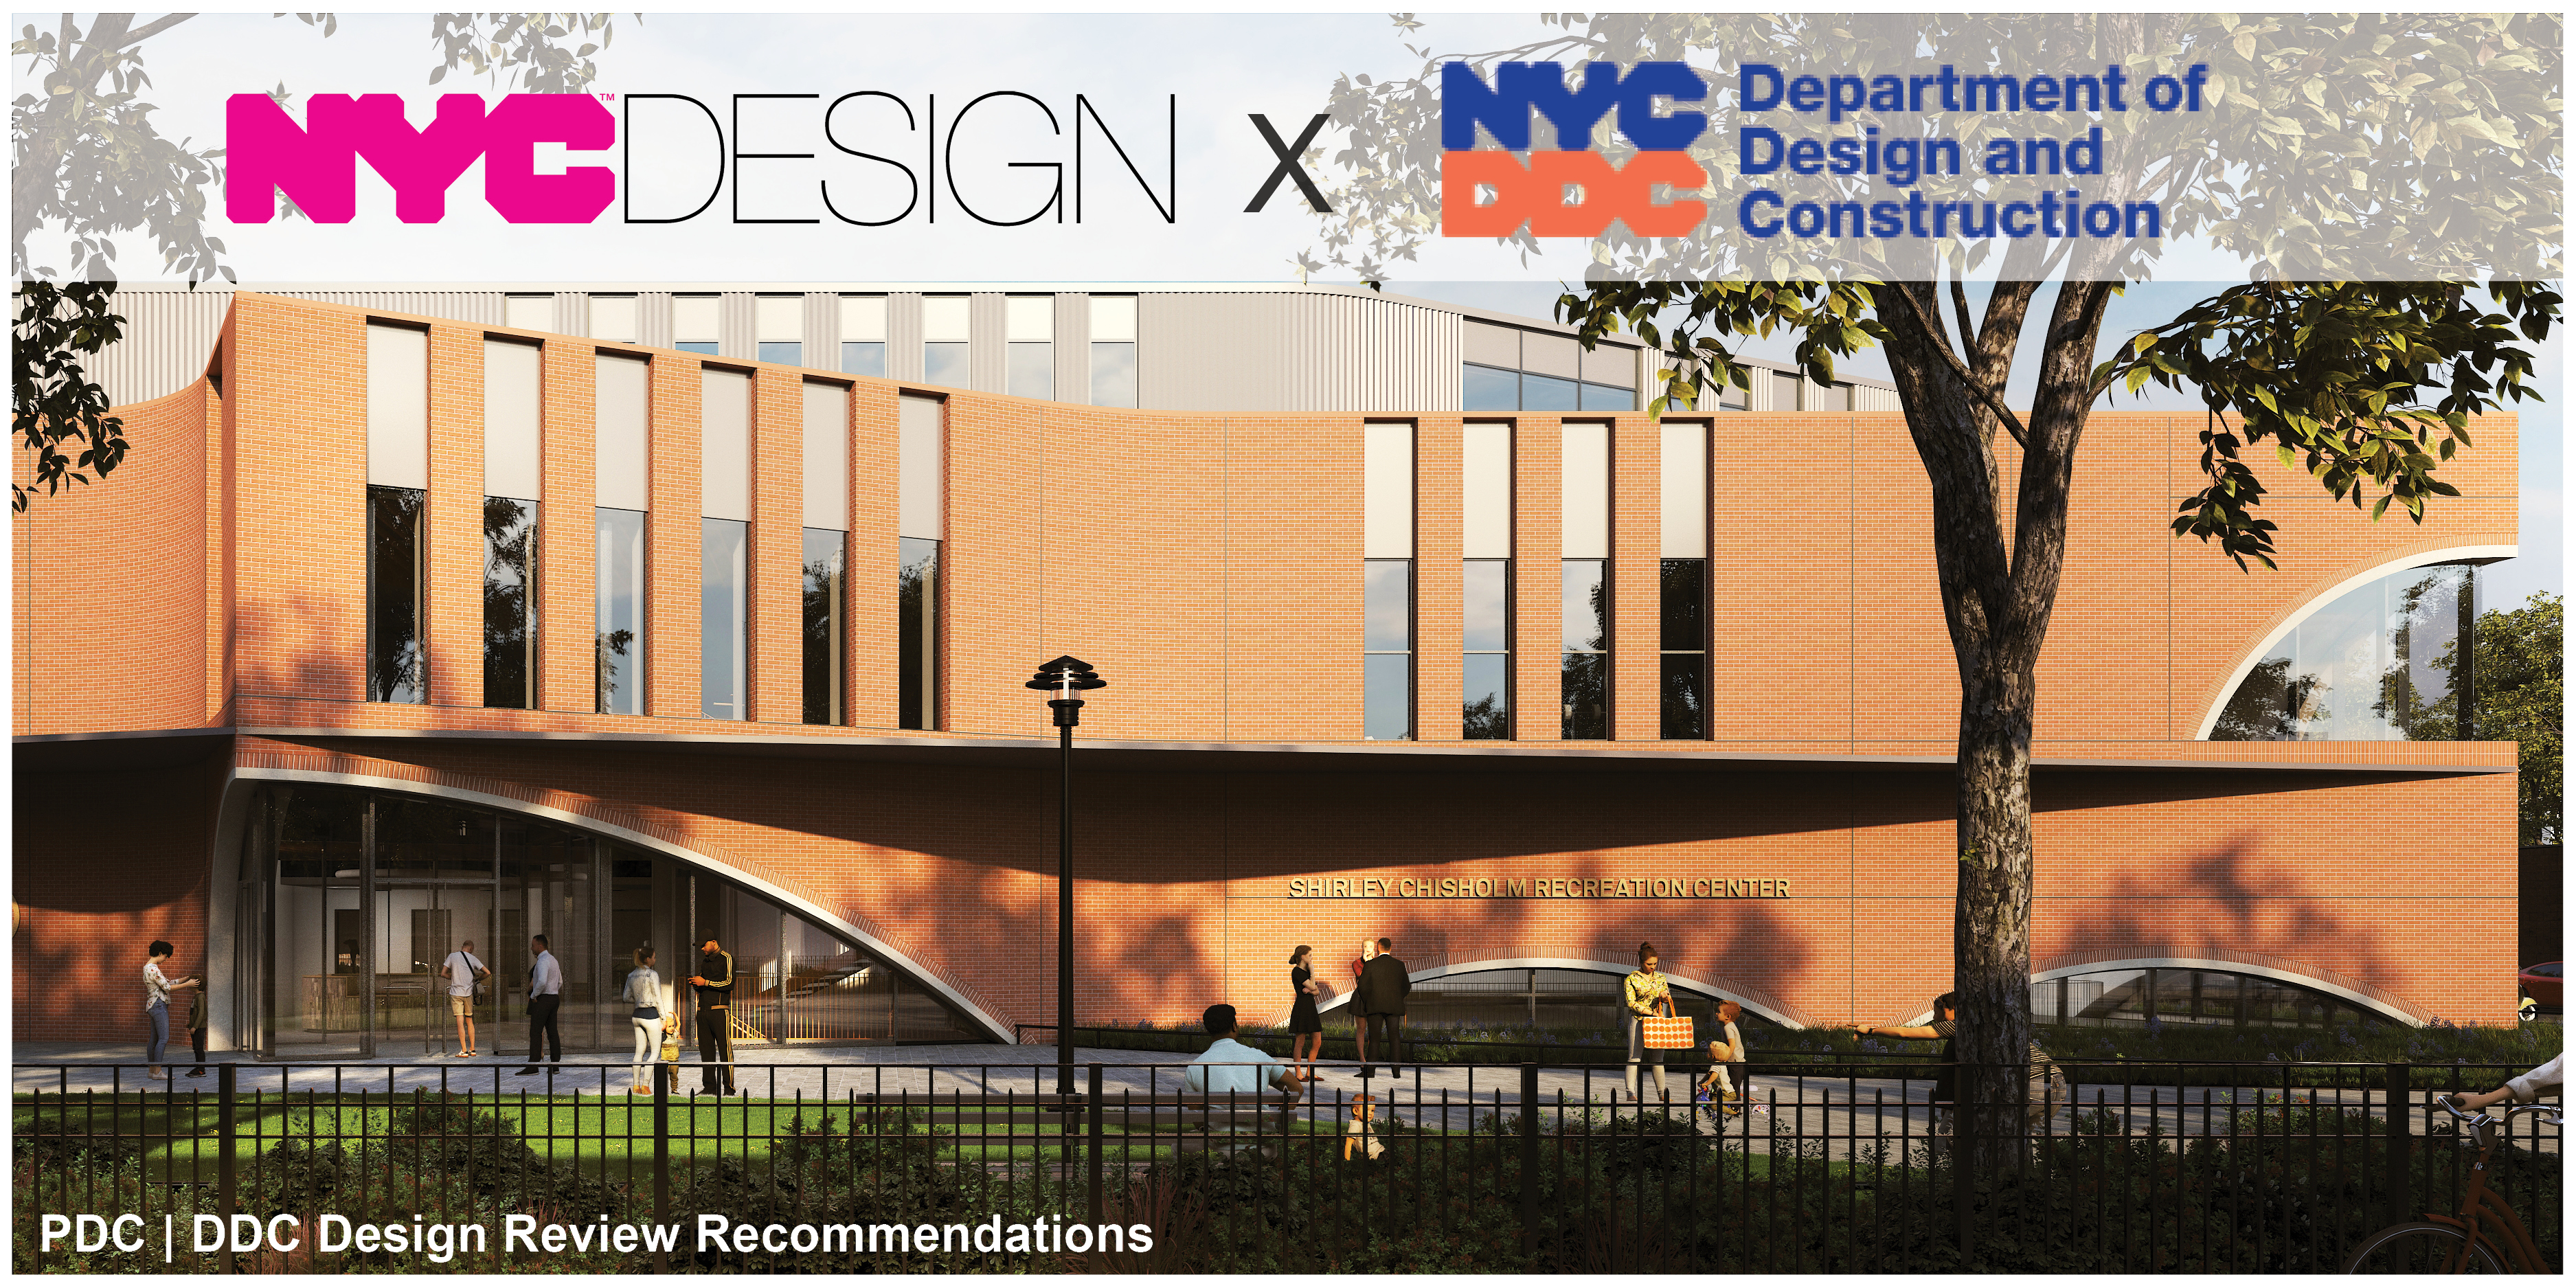 Working Together for Quality Public Design
                                           